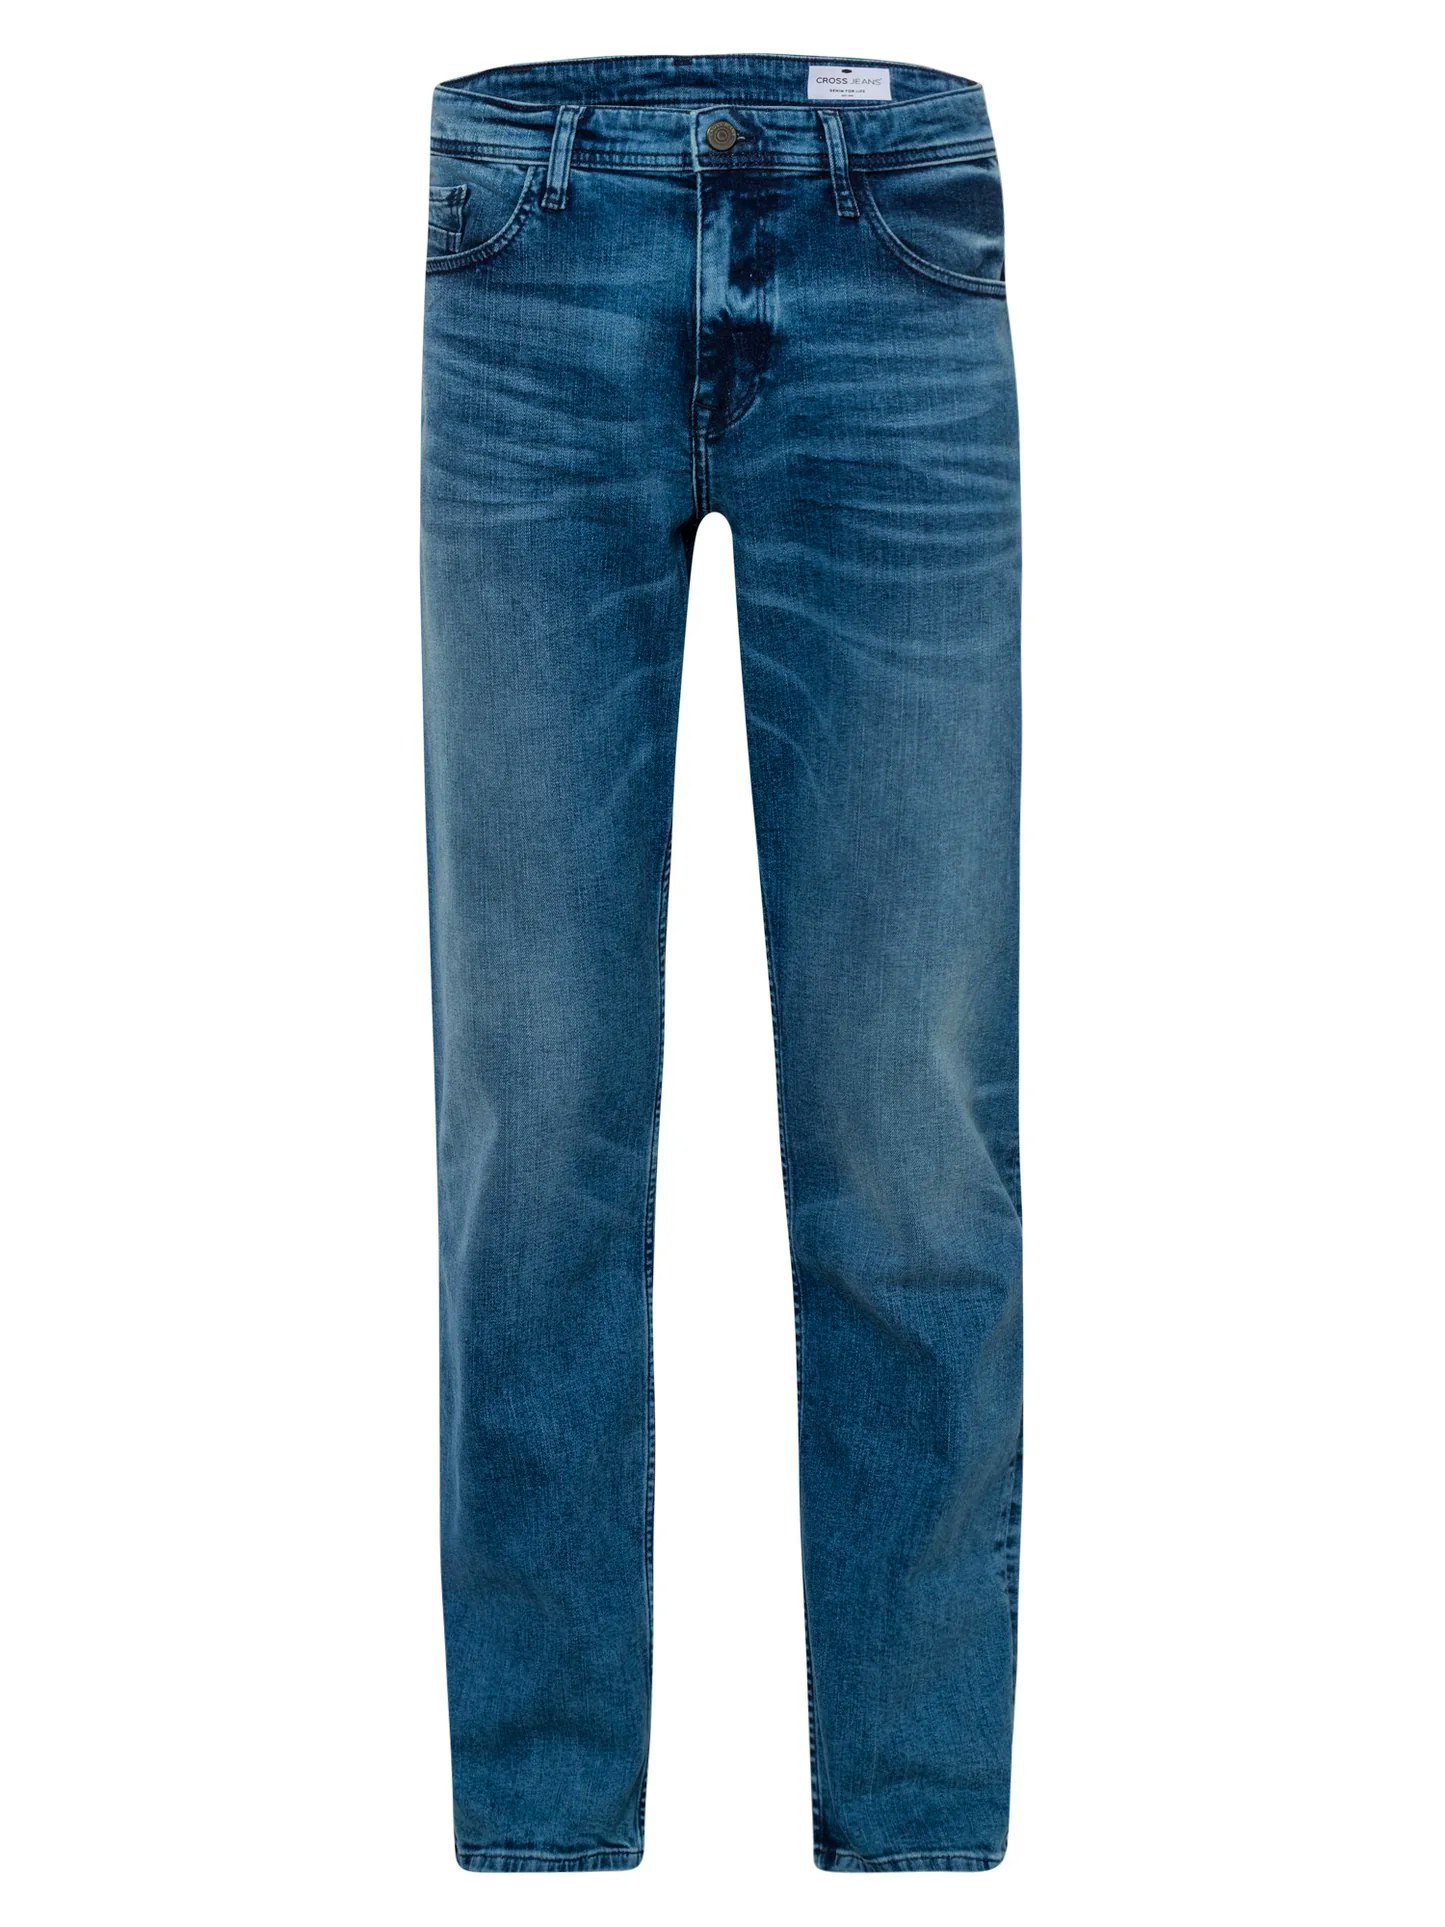 Cross Jeans Antonio Relaxed Fit mid blue used